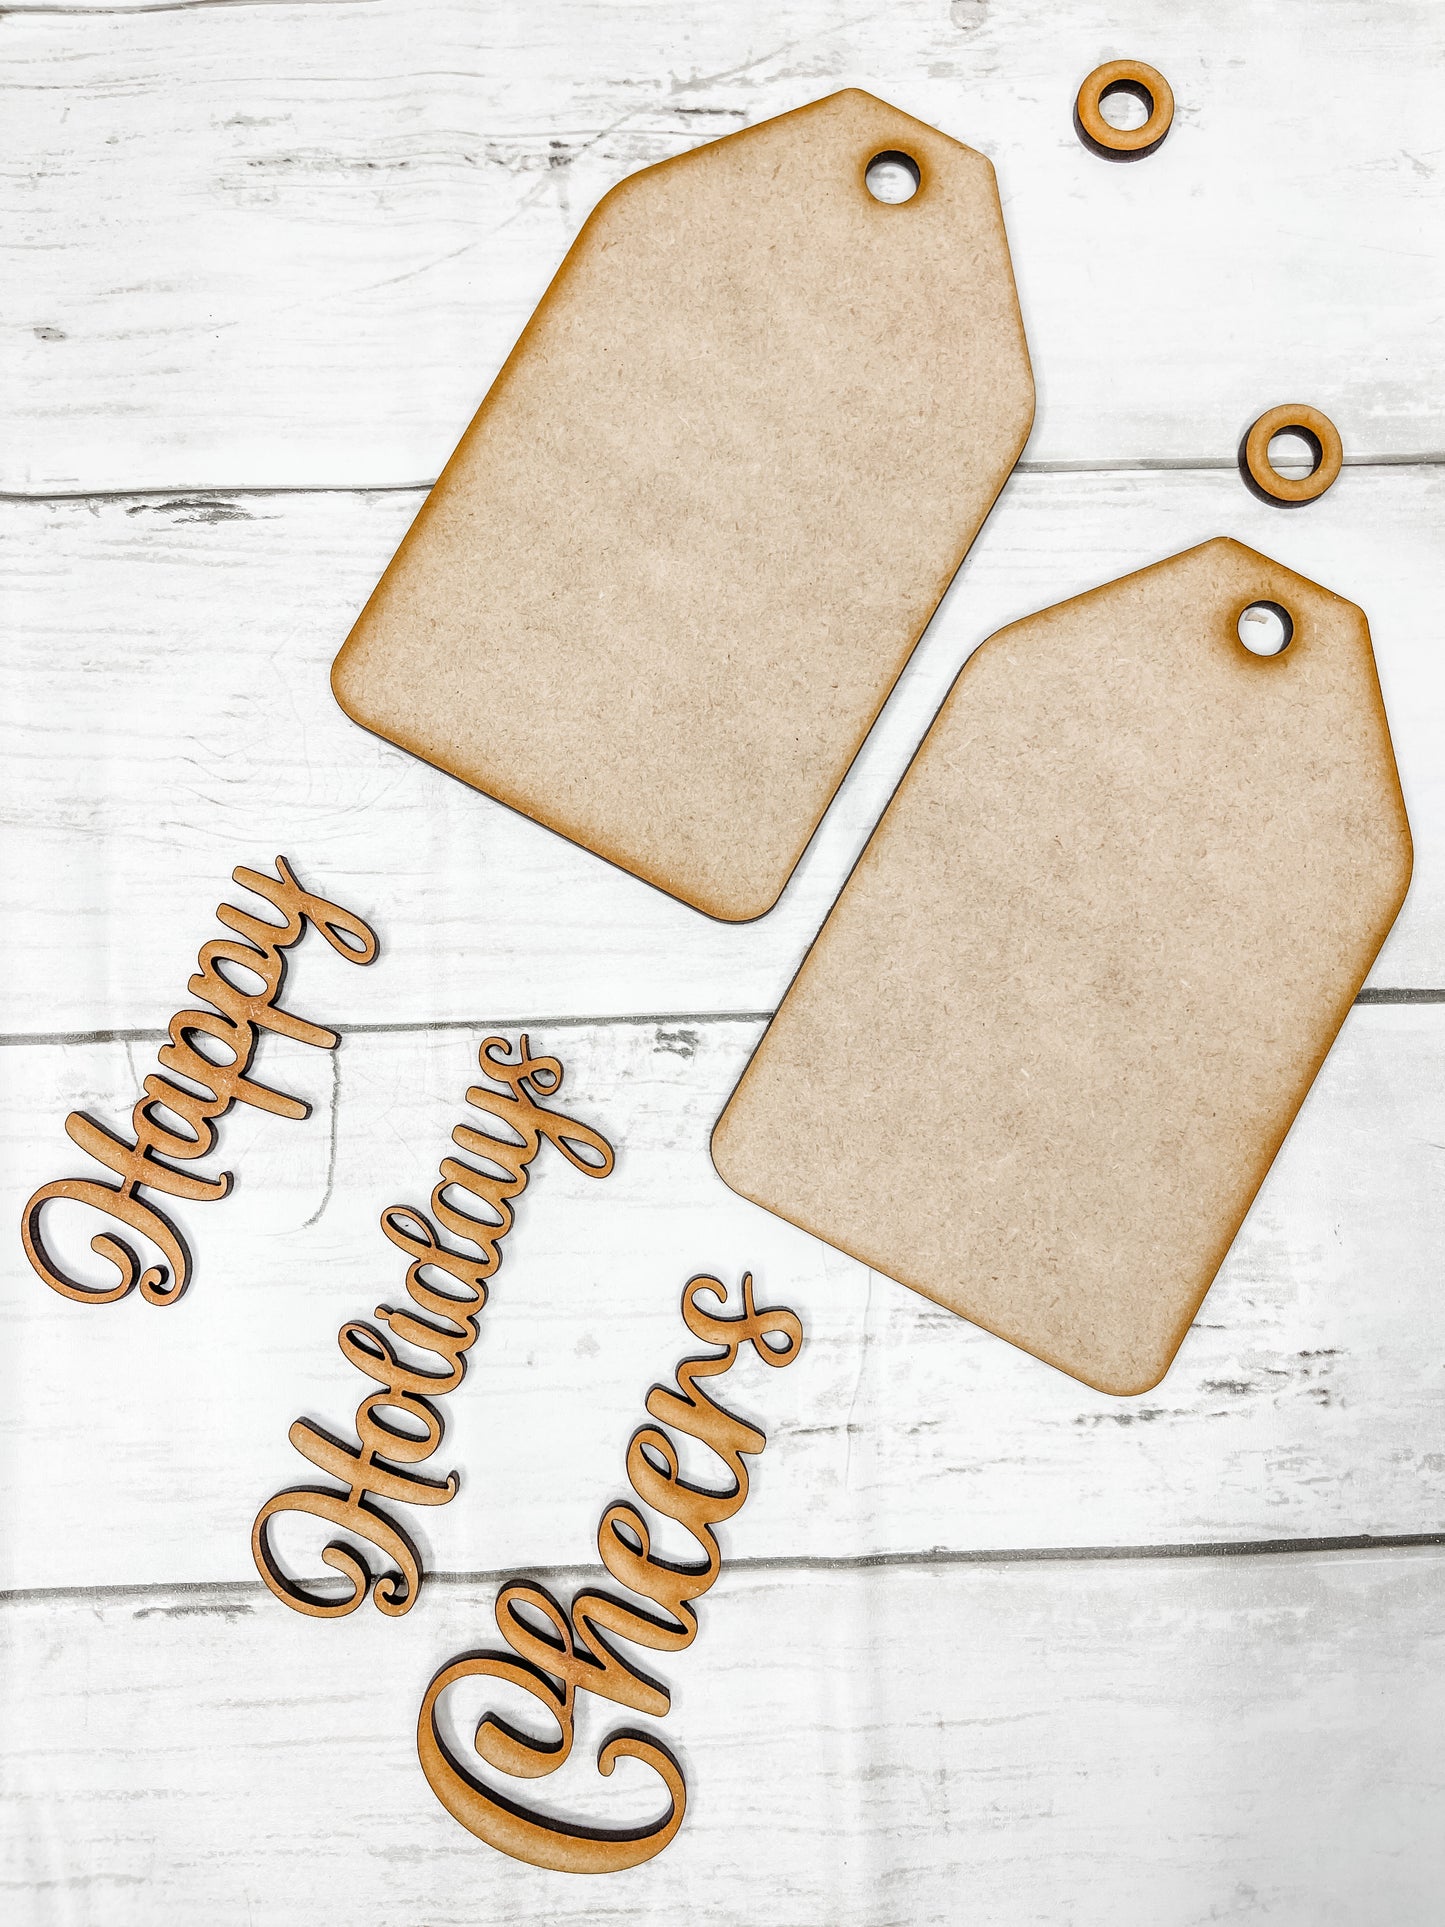 2 Christmas Tag Ornaments with words DIY Kit